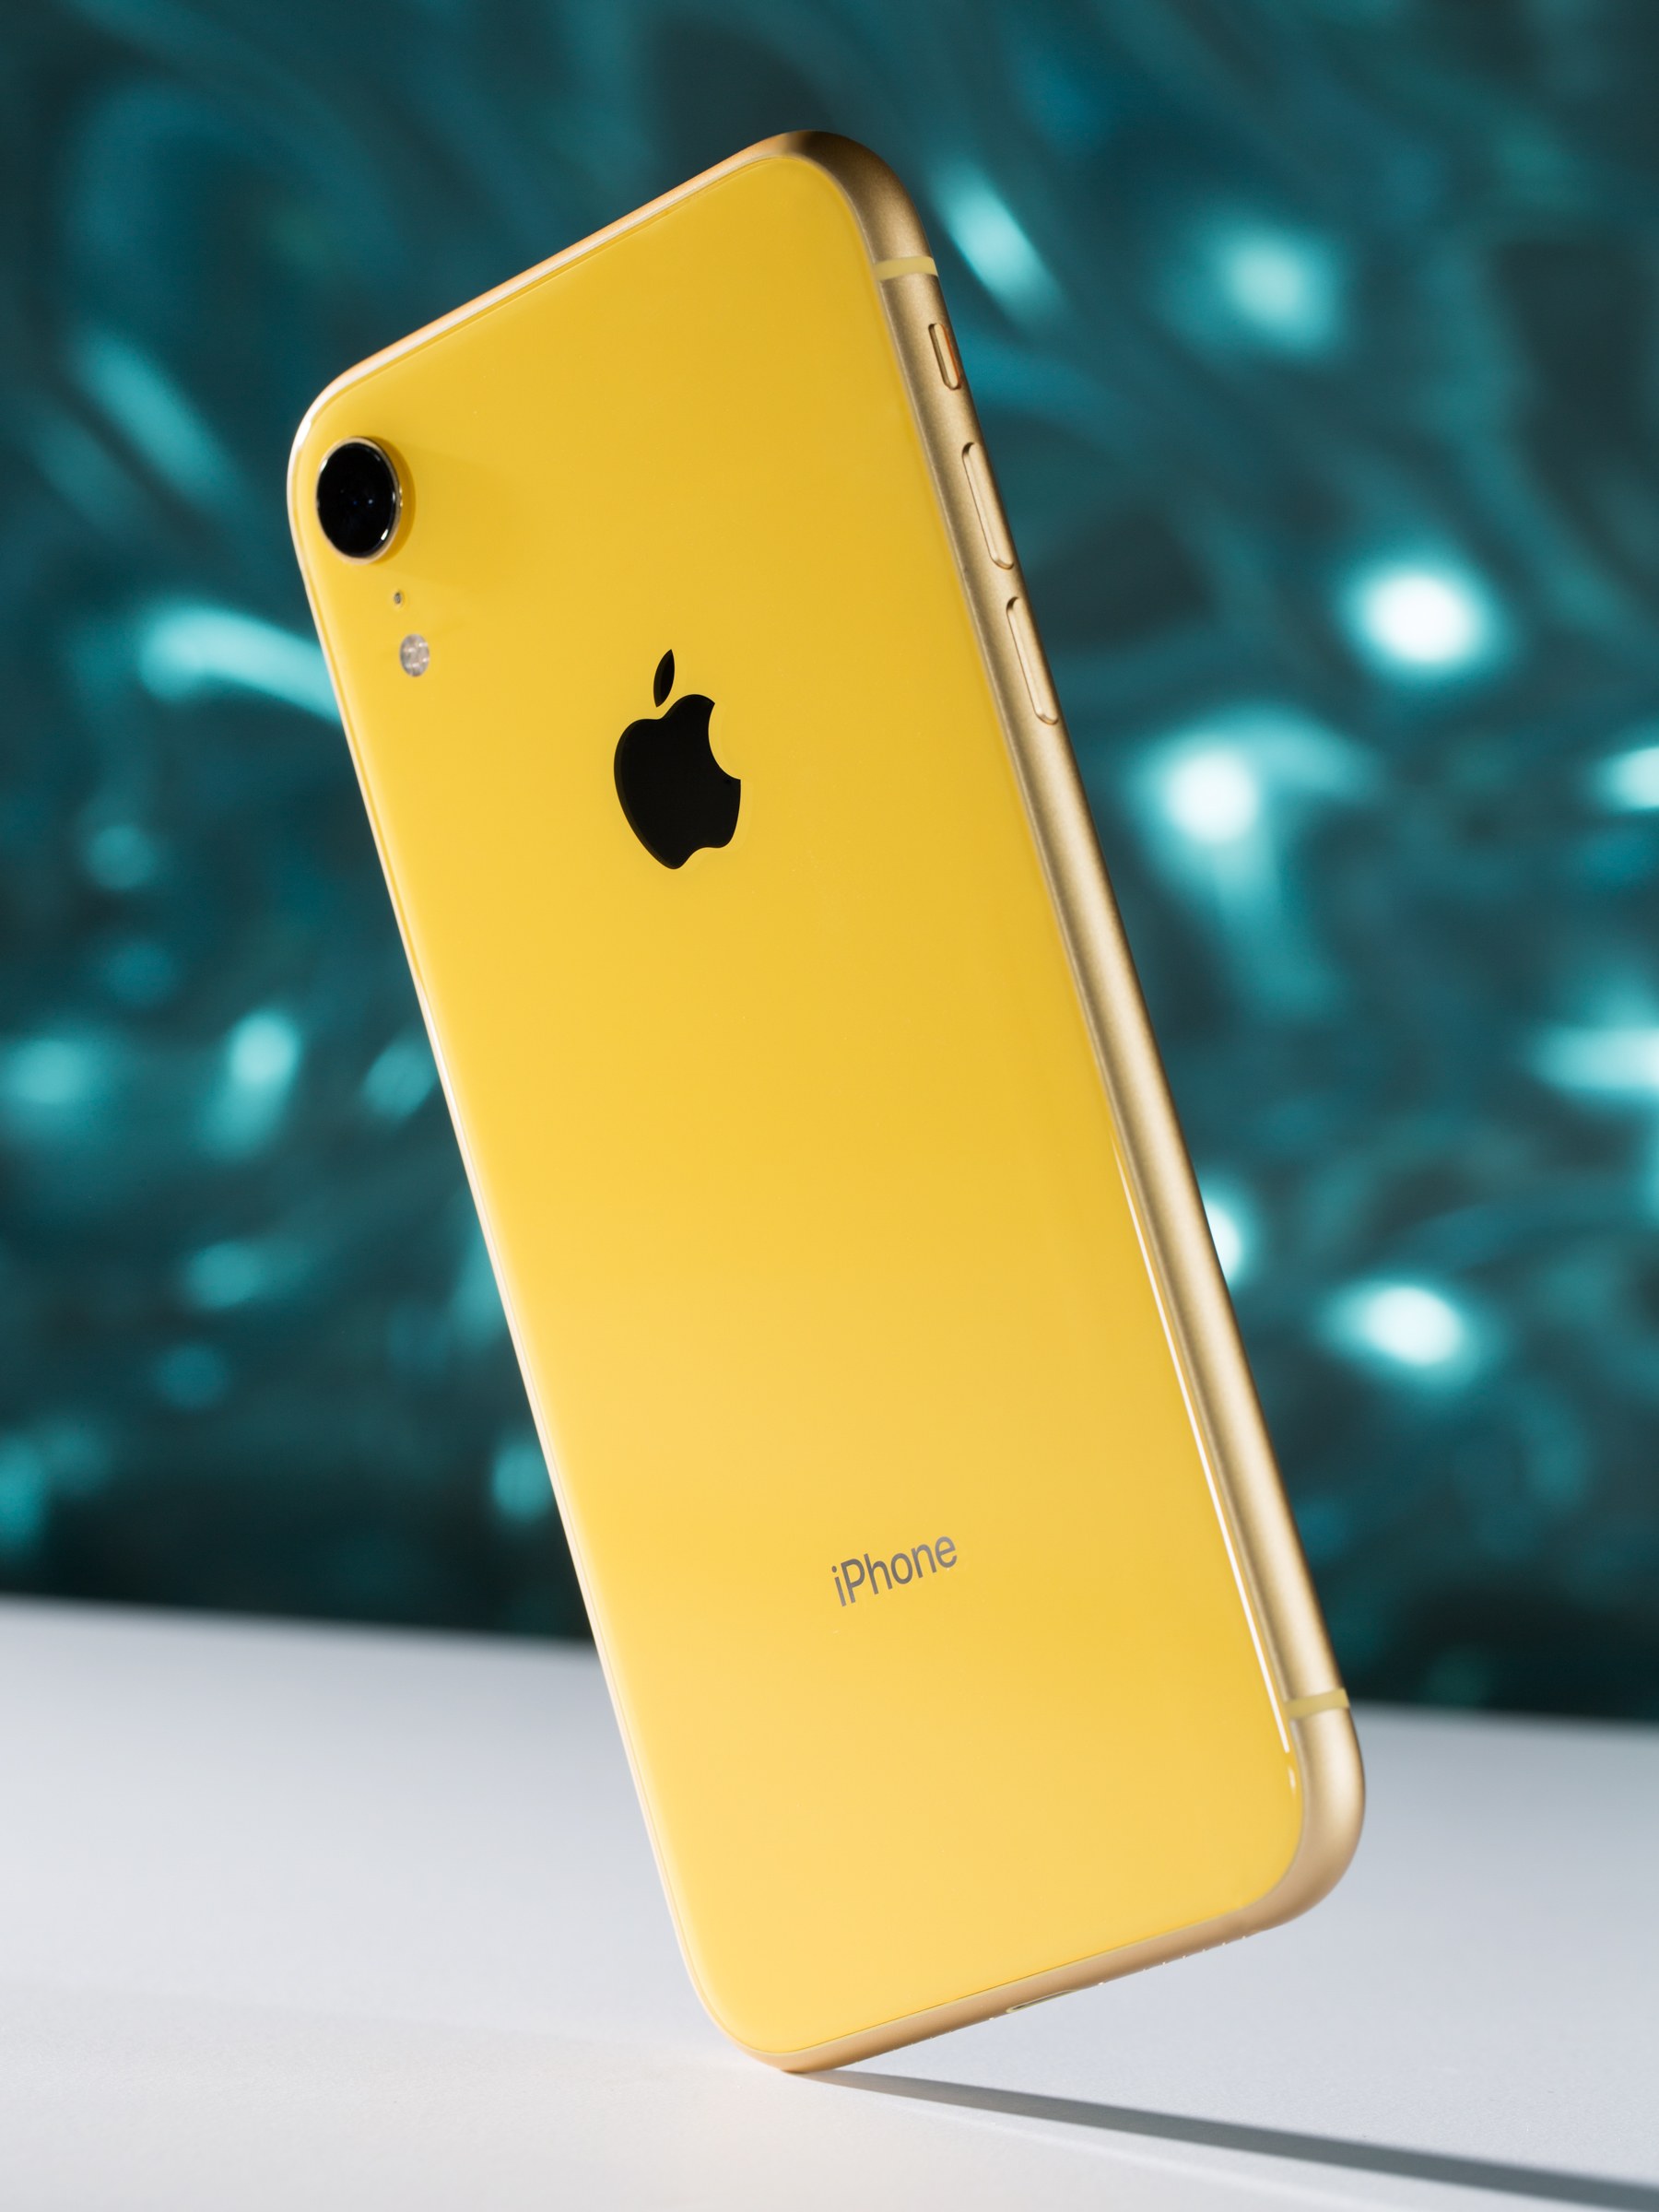 Apple iPhone XR 2019 release date, specs, features and